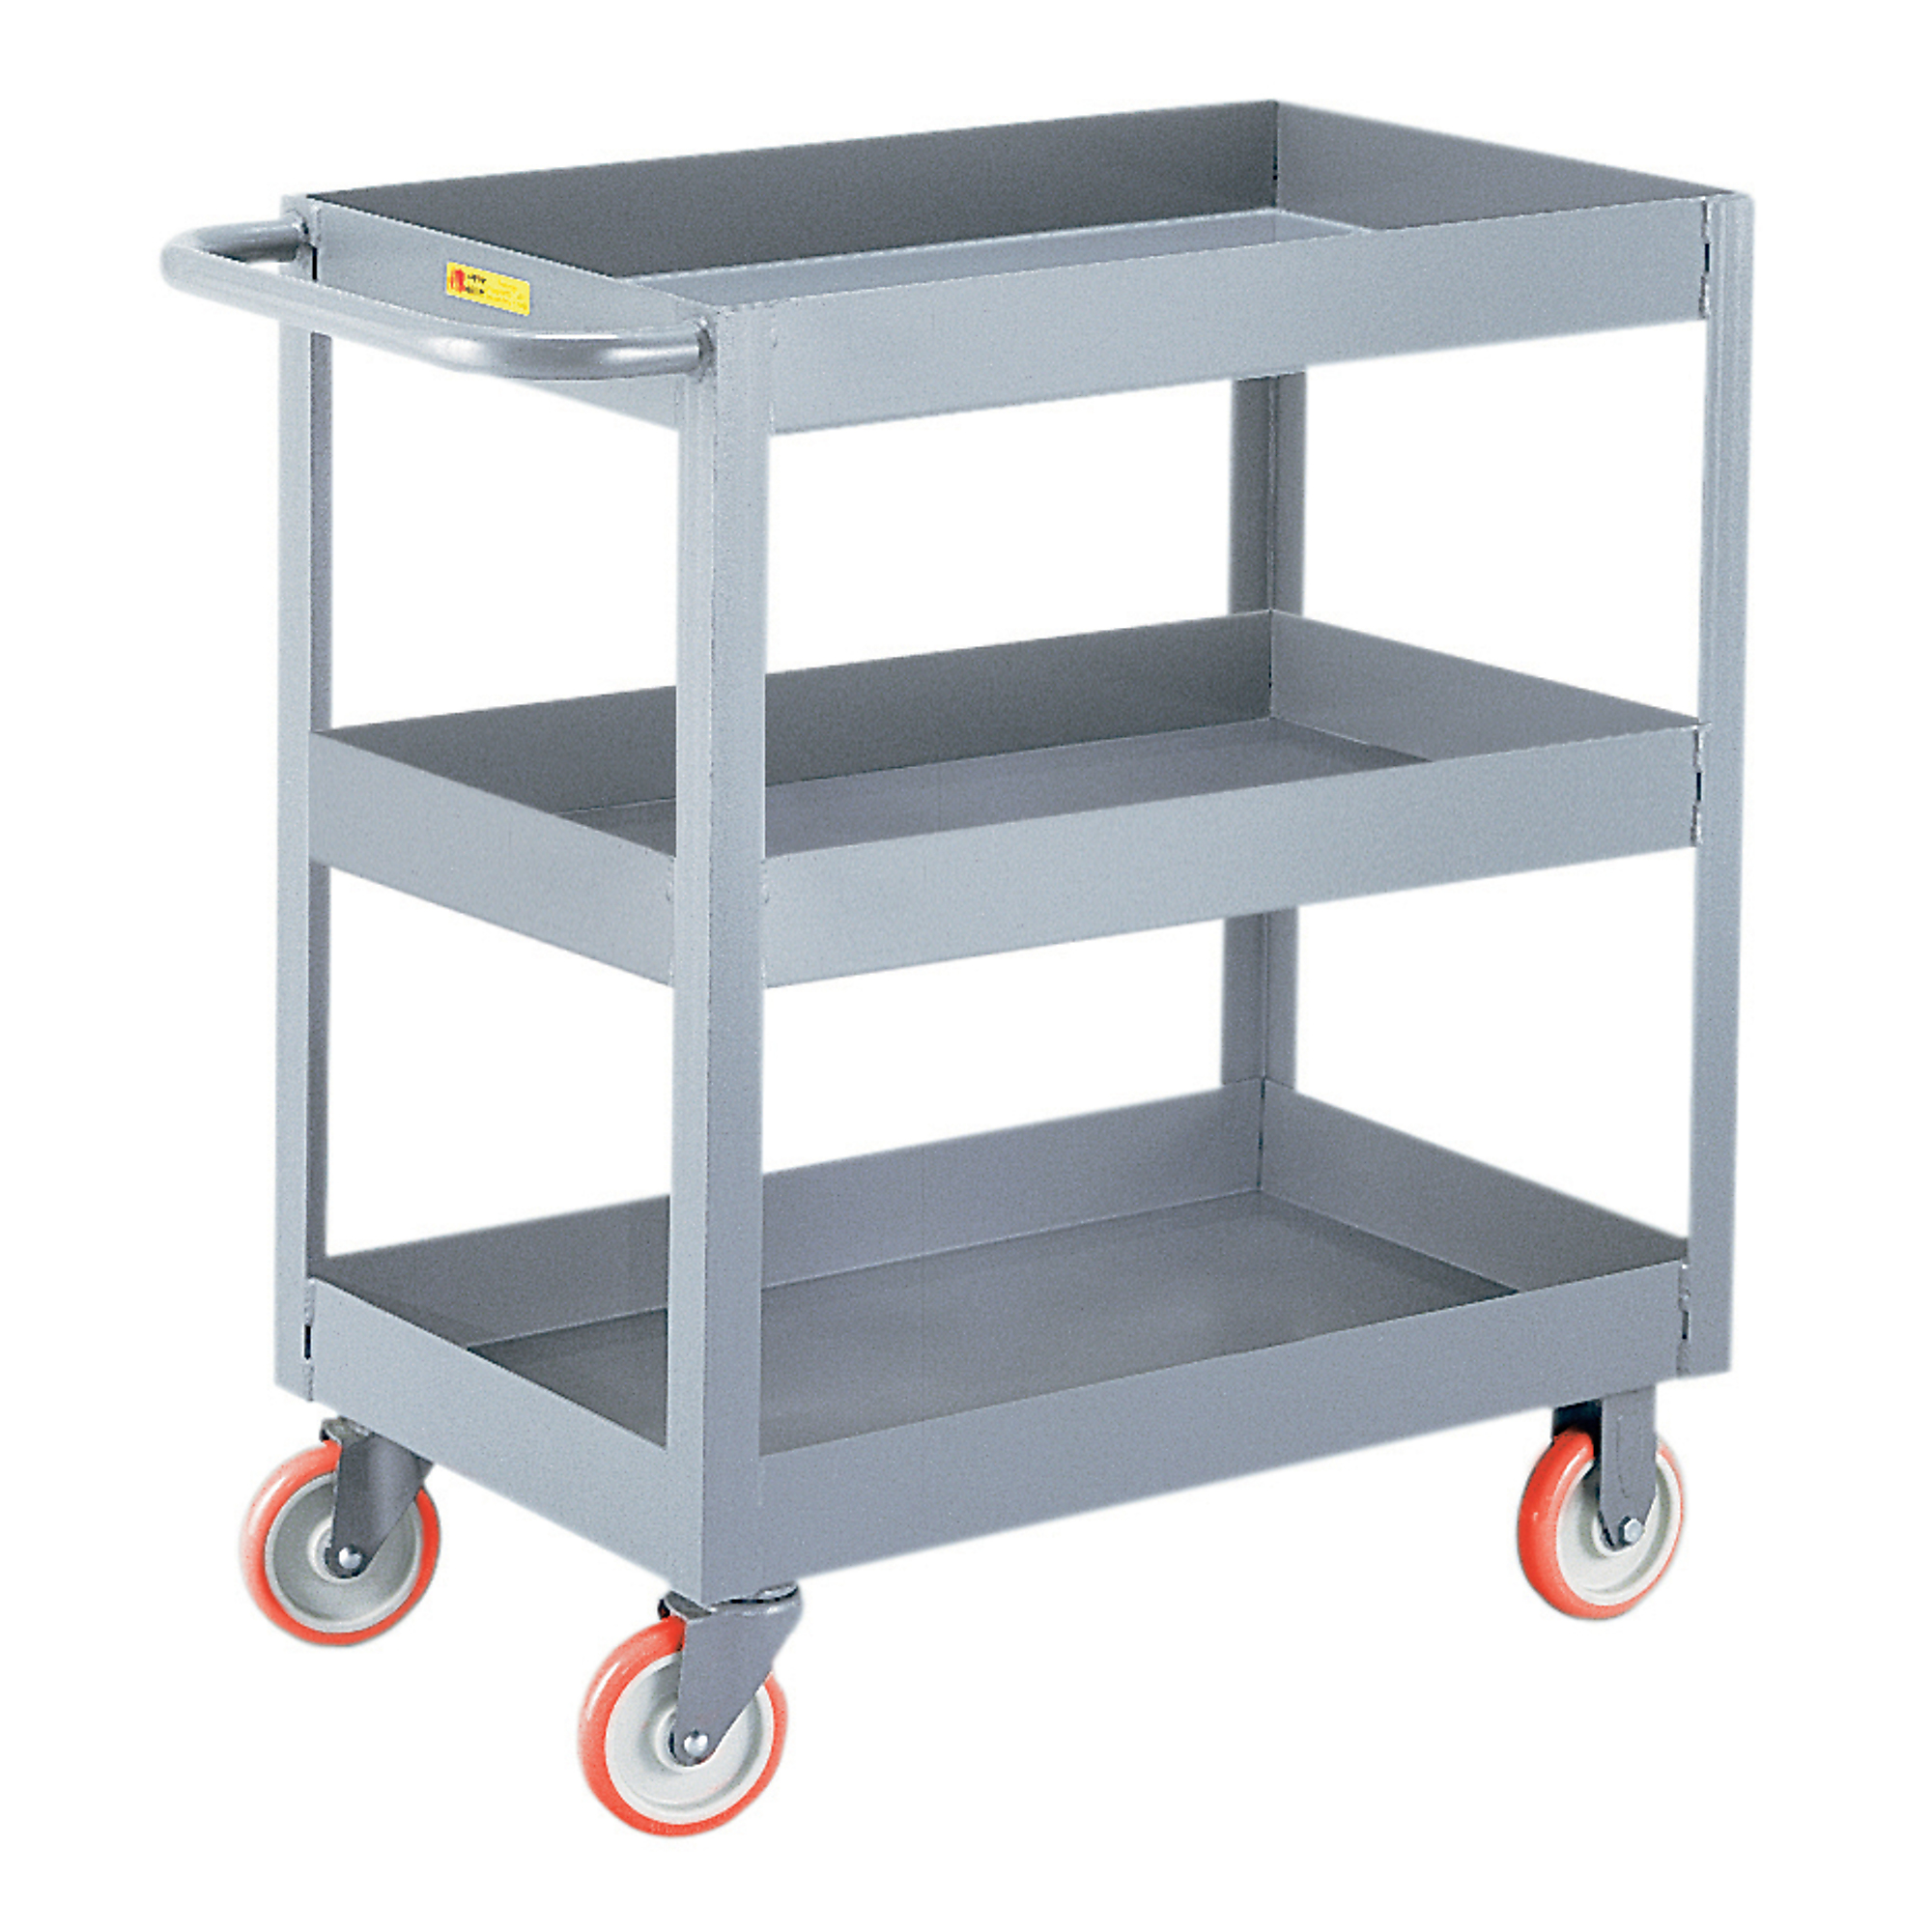 Little Giant, 3Inch Deep Shelf Truck, 24x48, 1200 lbs, Total Capacity 1200 lb, Shelves (qty.) 3, Material Carbon Steel, Model 3DS2448X3-5PY